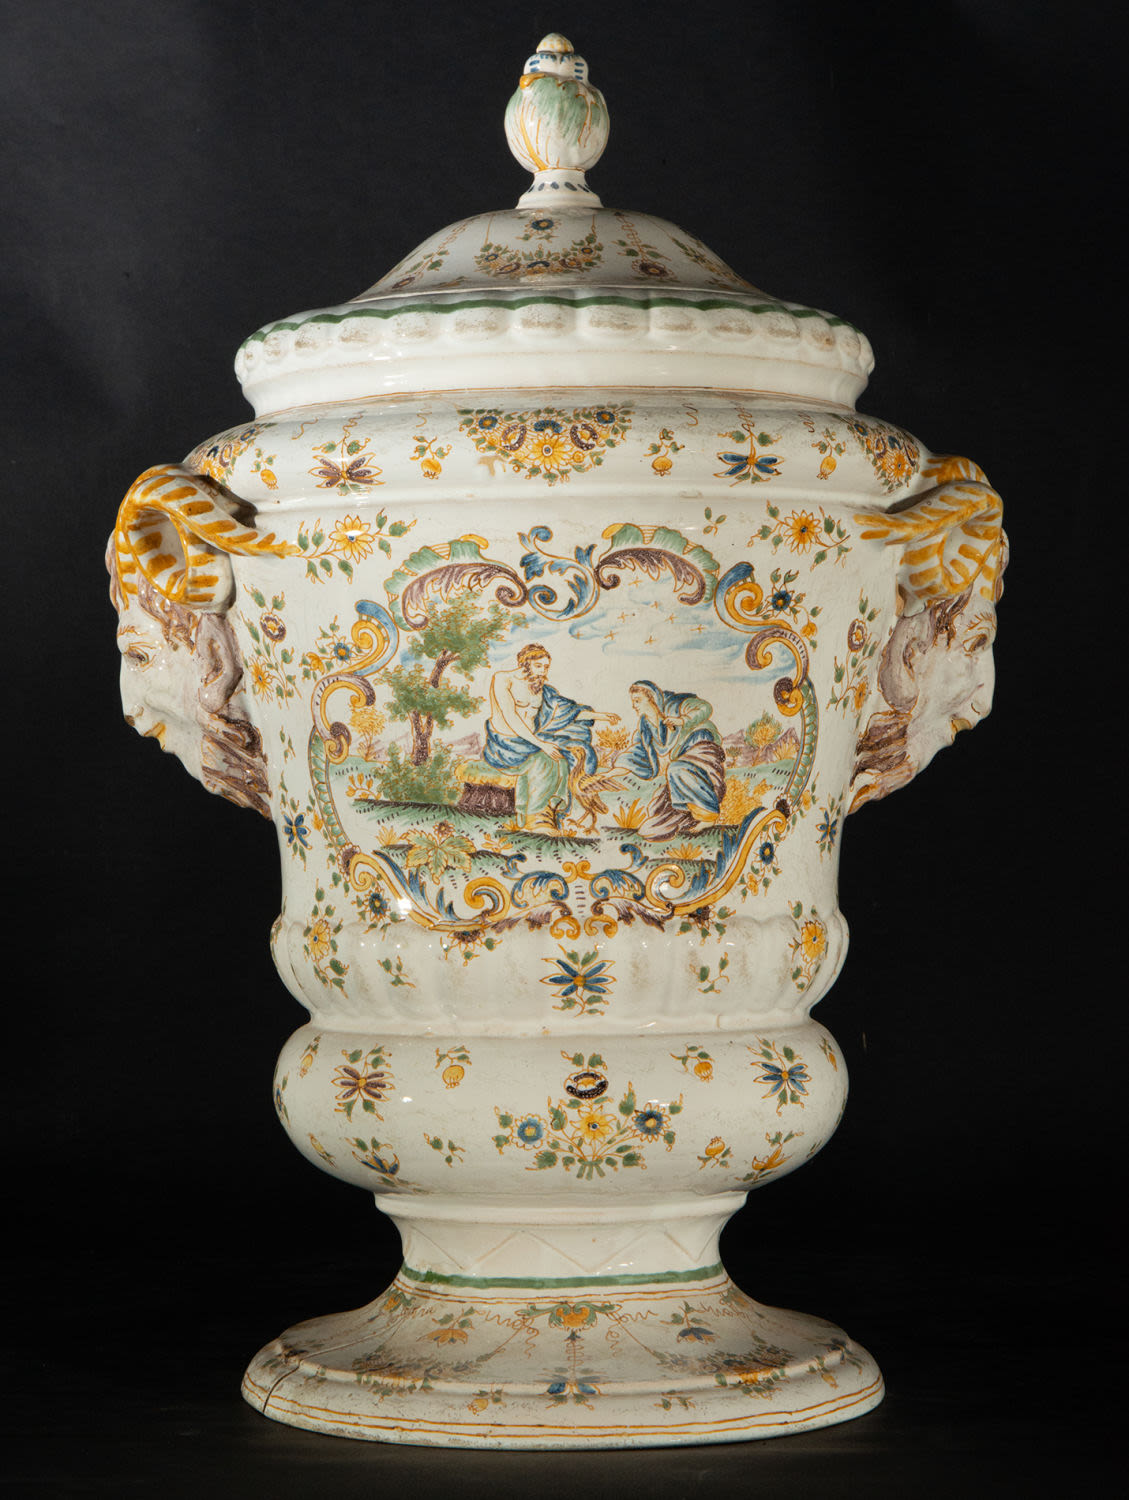 Ceramic vase from Moustiers, France, 18th century